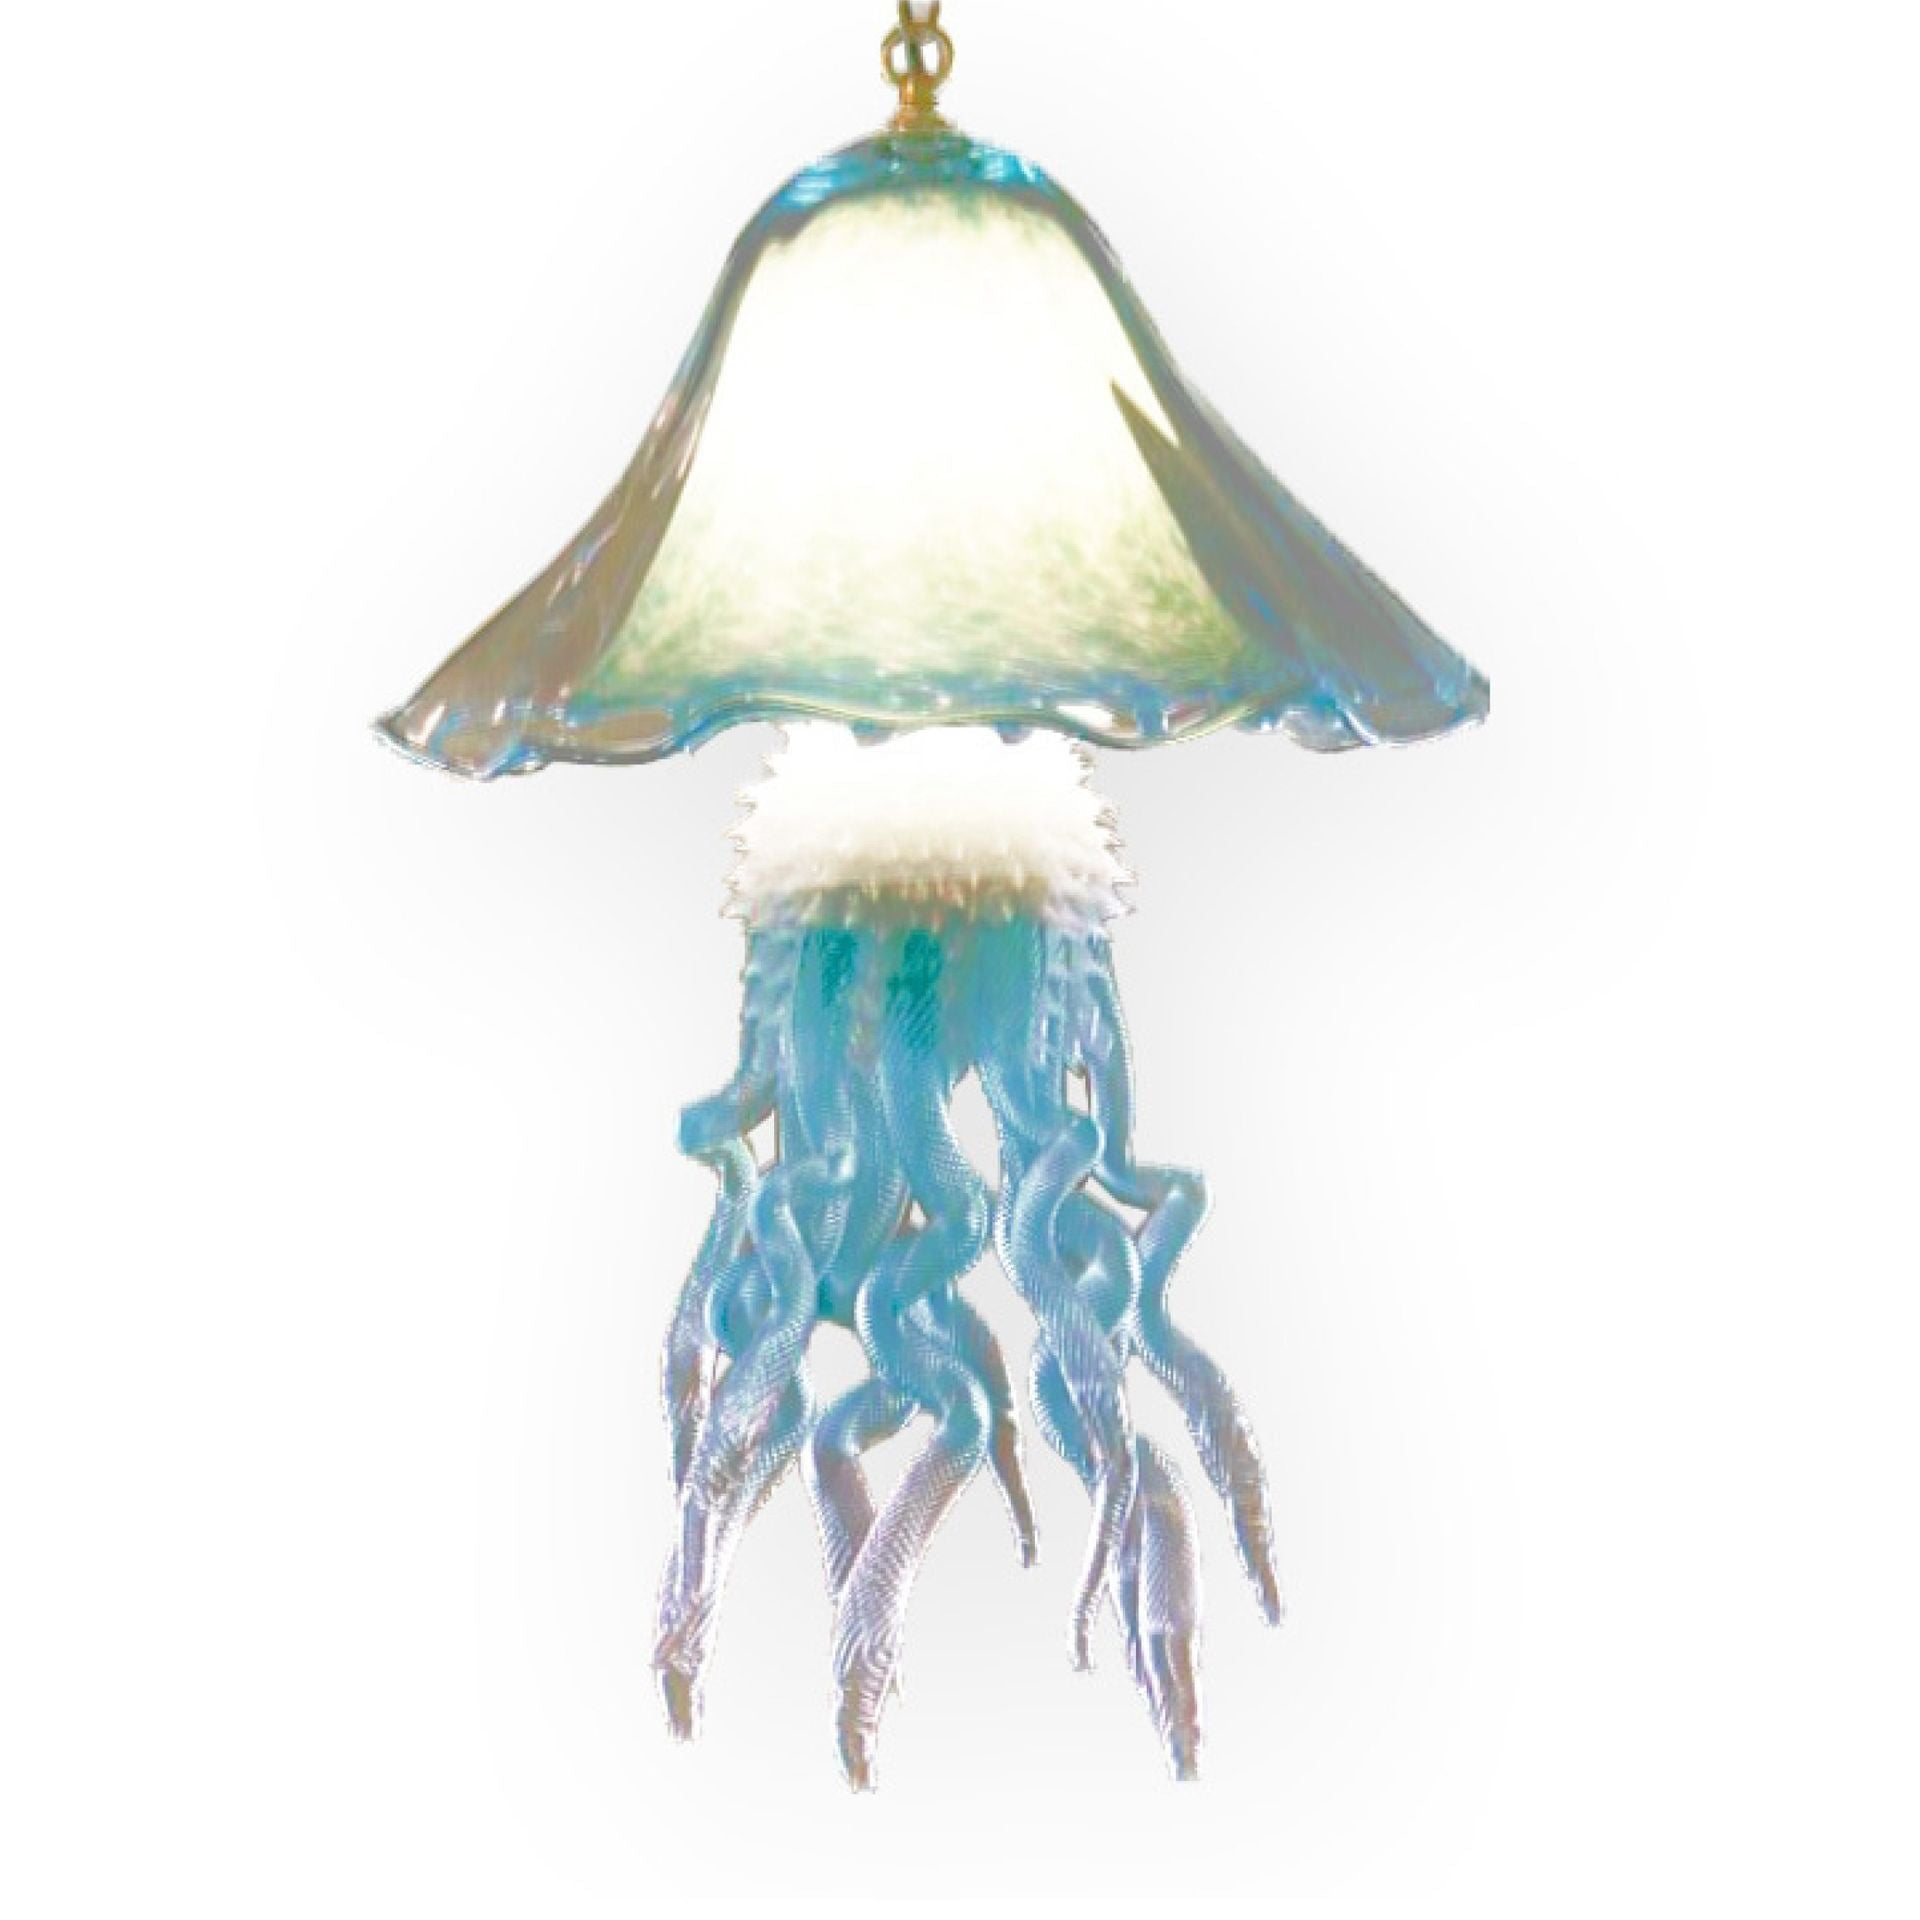 Realistic Jellyfish Double Dome Chandelier in 12 Colors USA Blown Glass - Eclectic Treasures